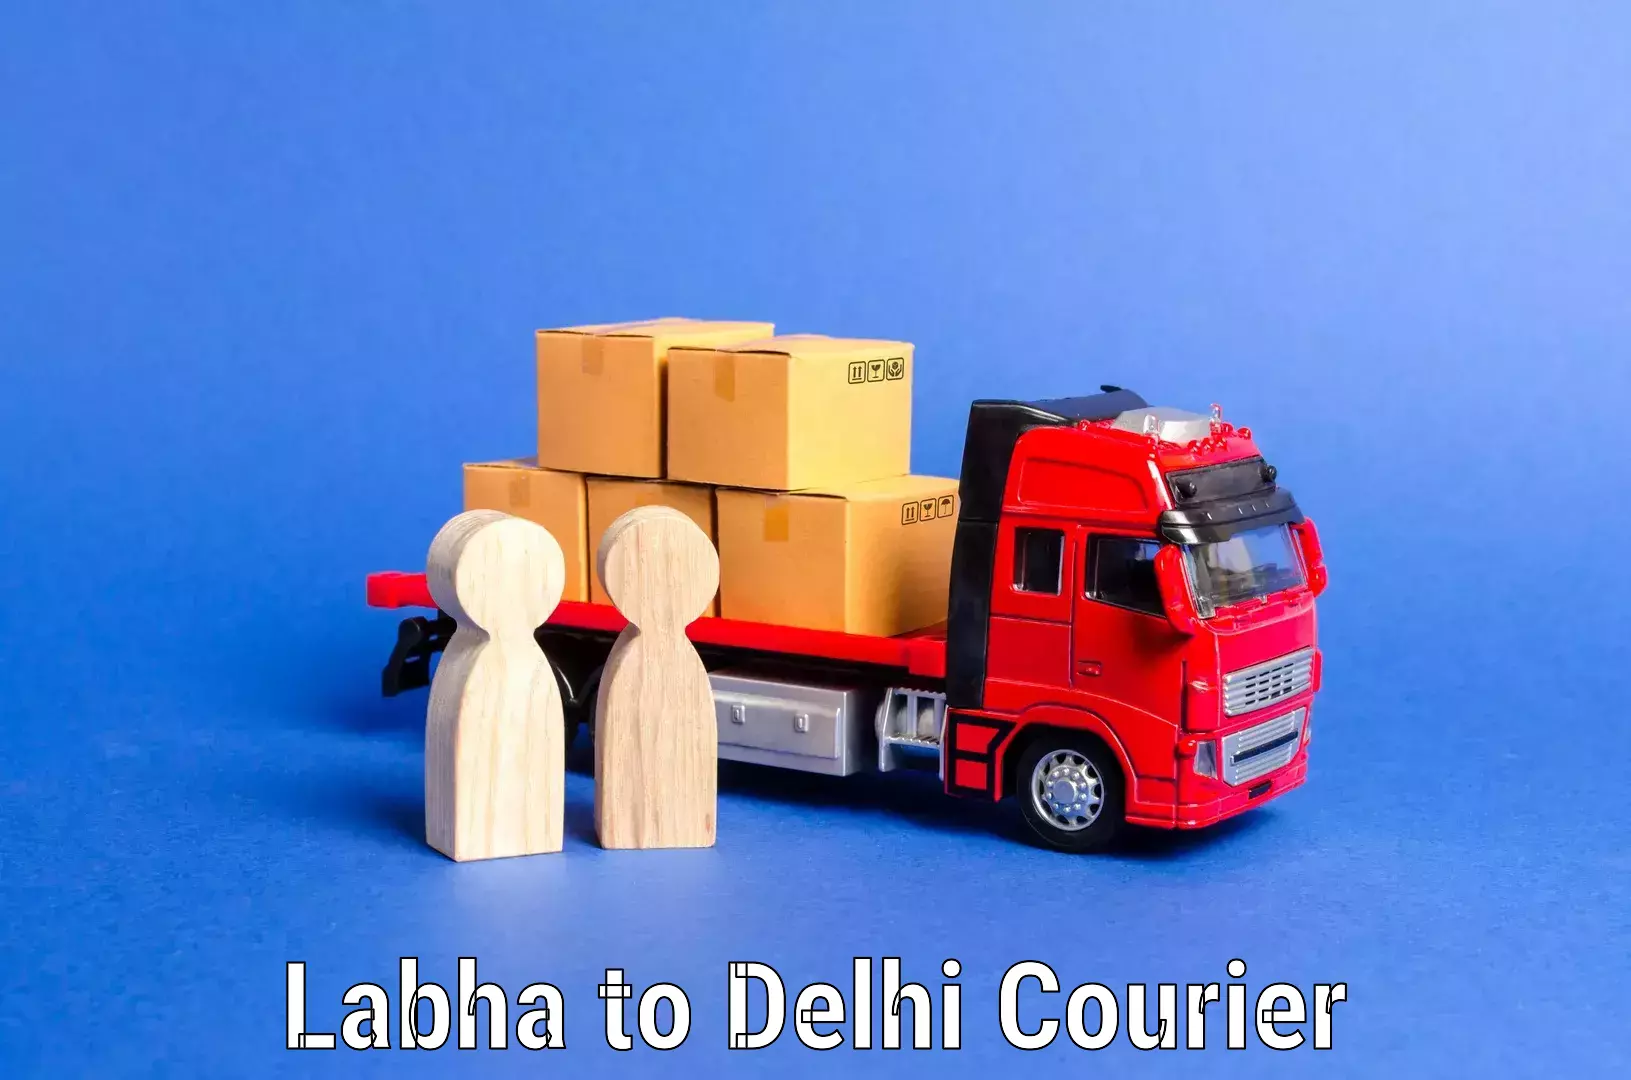 Professional furniture movers Labha to Delhi